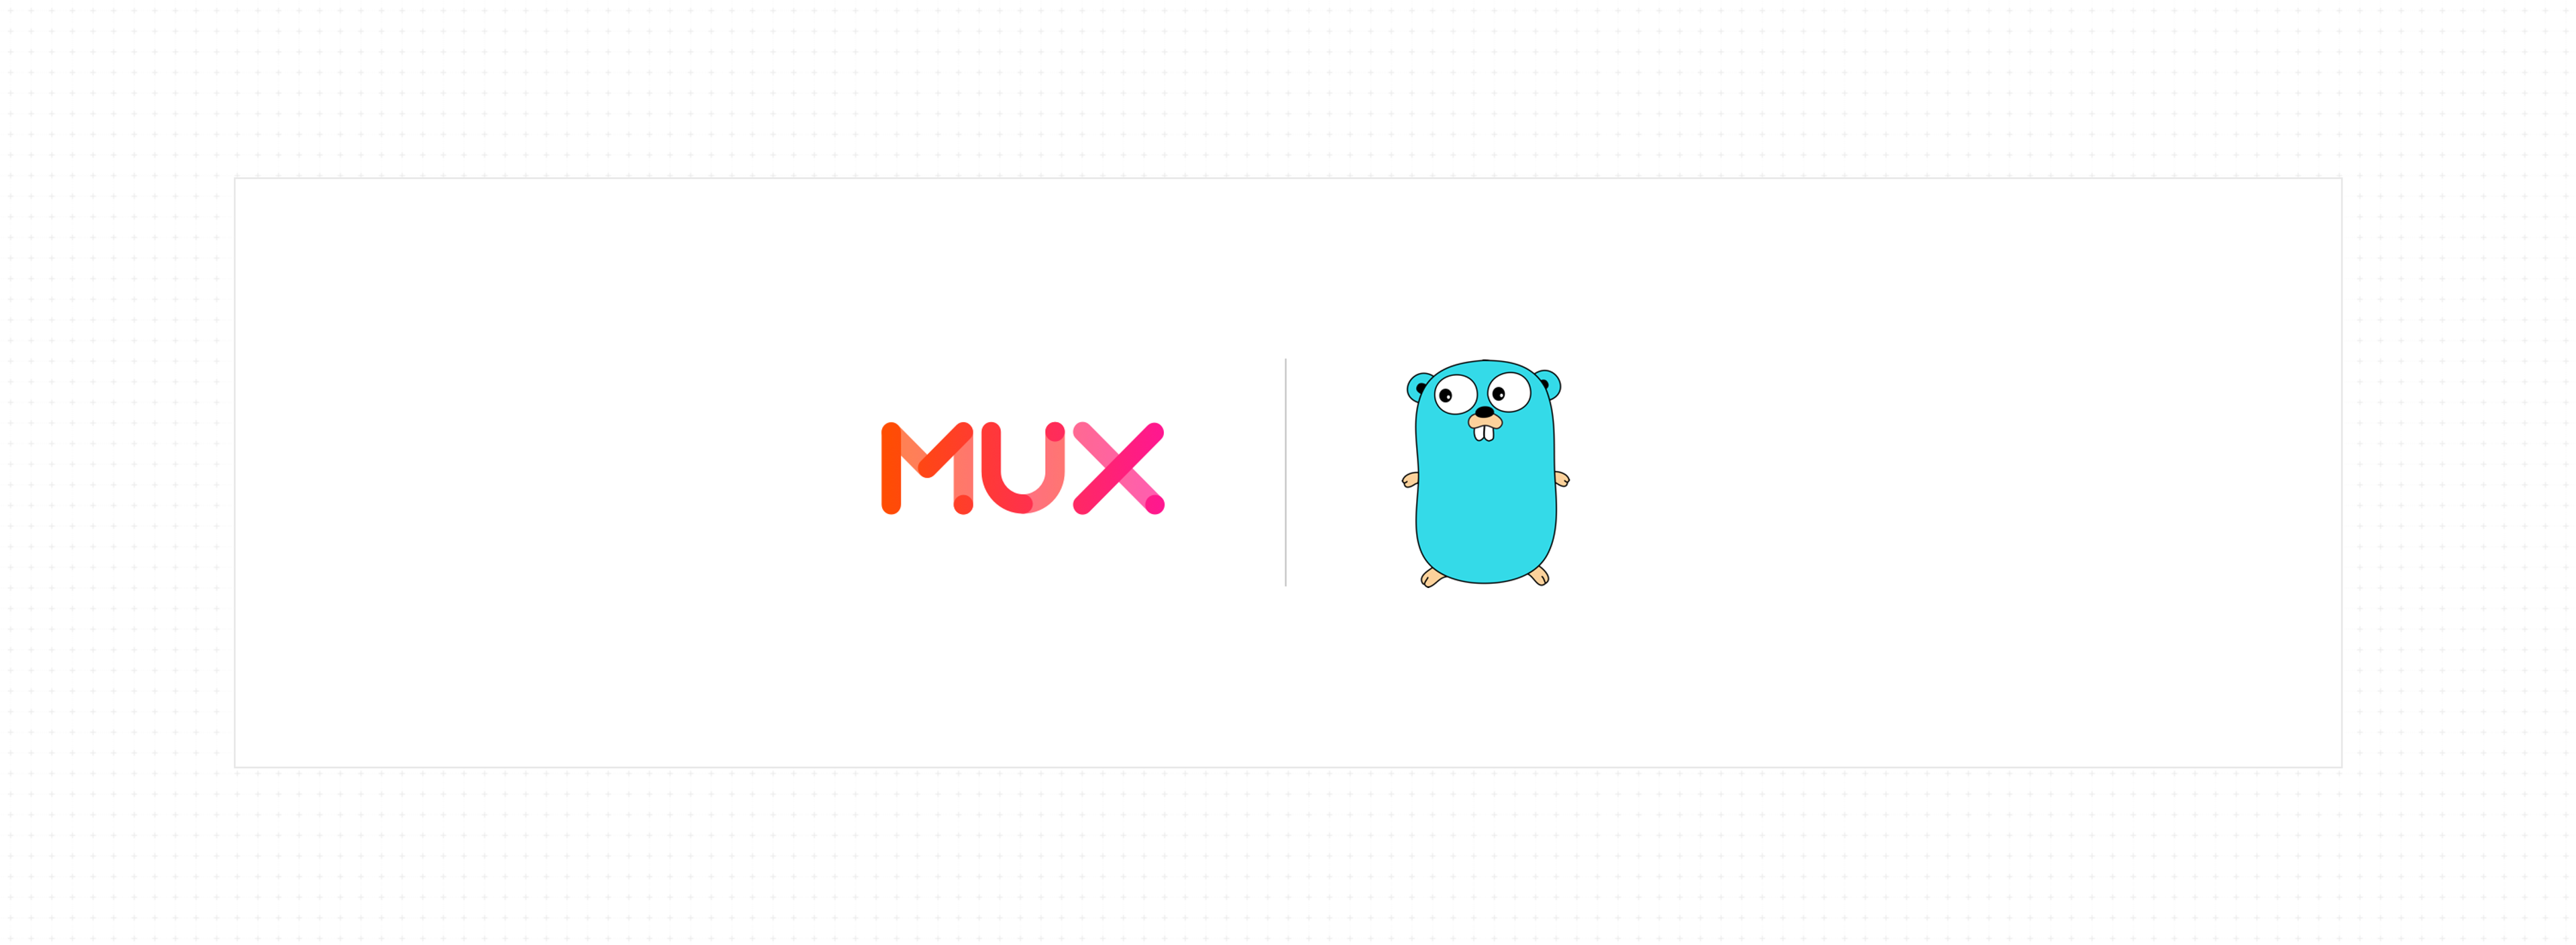 Get going with Mux Go!